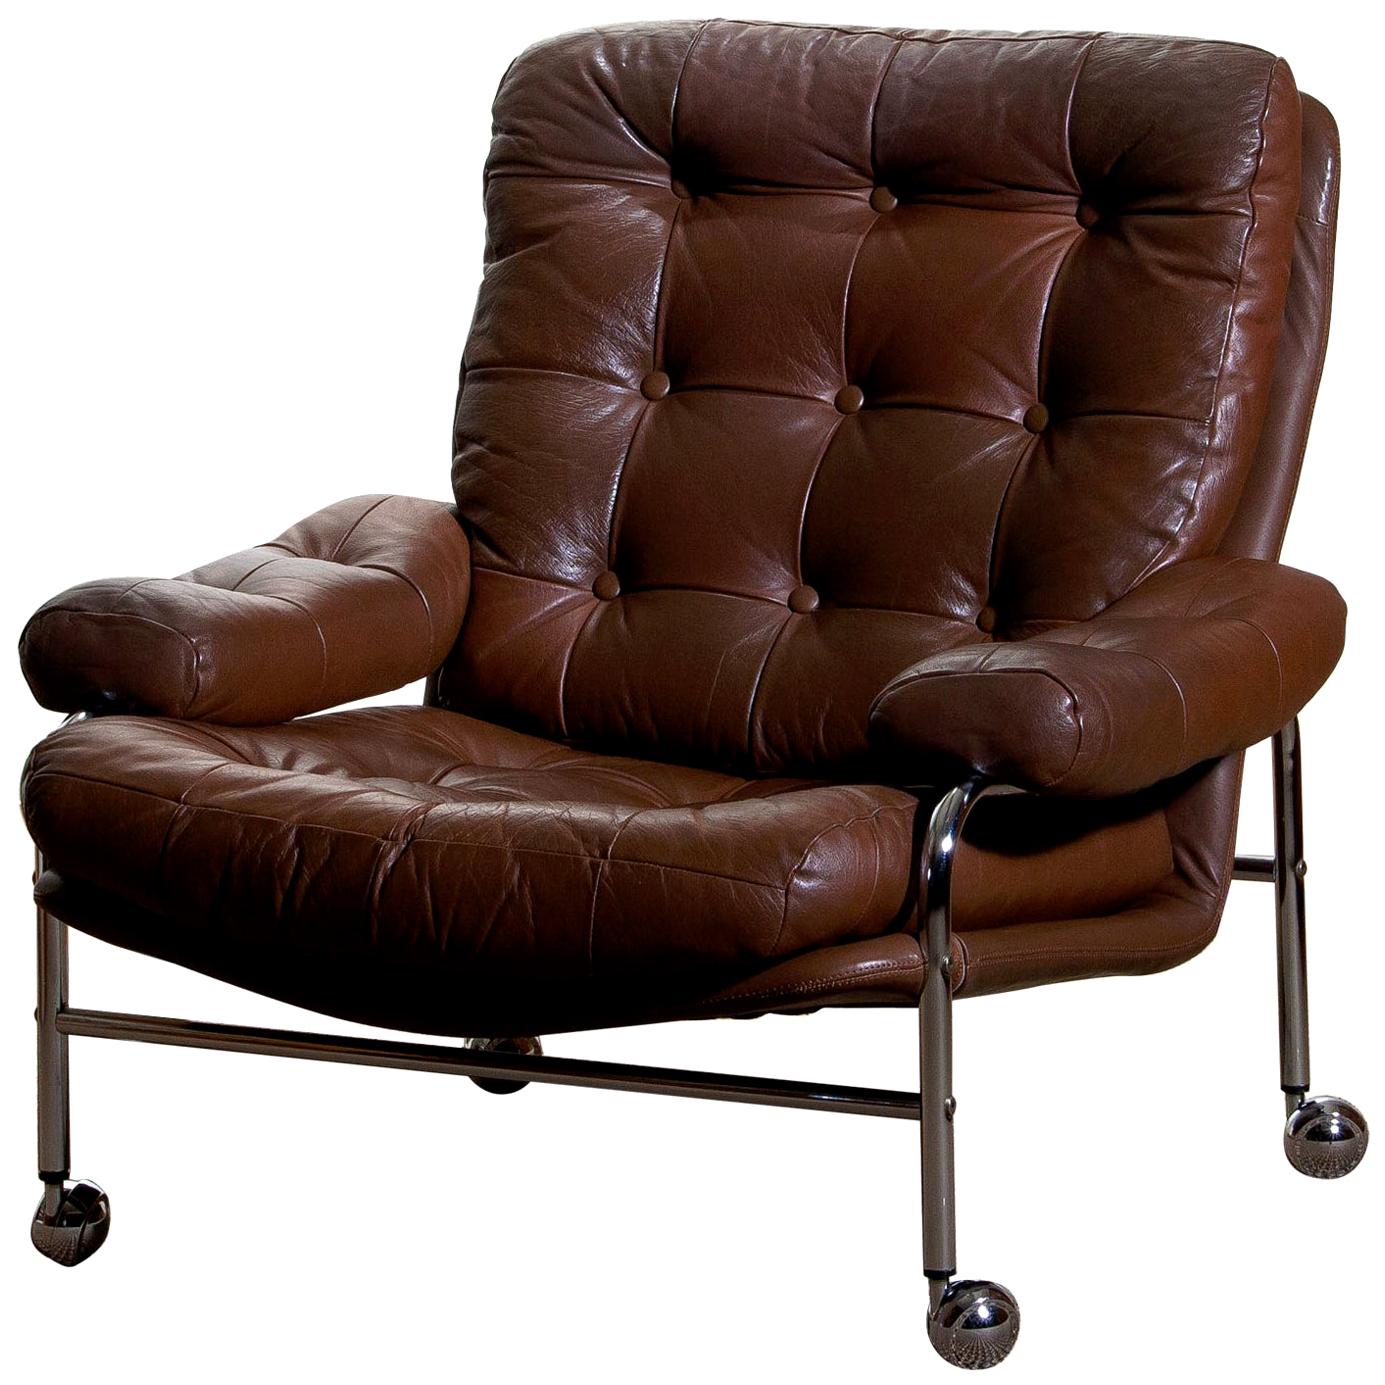 Extremely comfortable easy or lounge chair made by Scapa Rydaholm, Sweden.
This, typical Scandinavian chair is upholstered with brown leather based on a chromed metal frame.
All in perfect condition.
Note: We have two chairs on stock! 
   